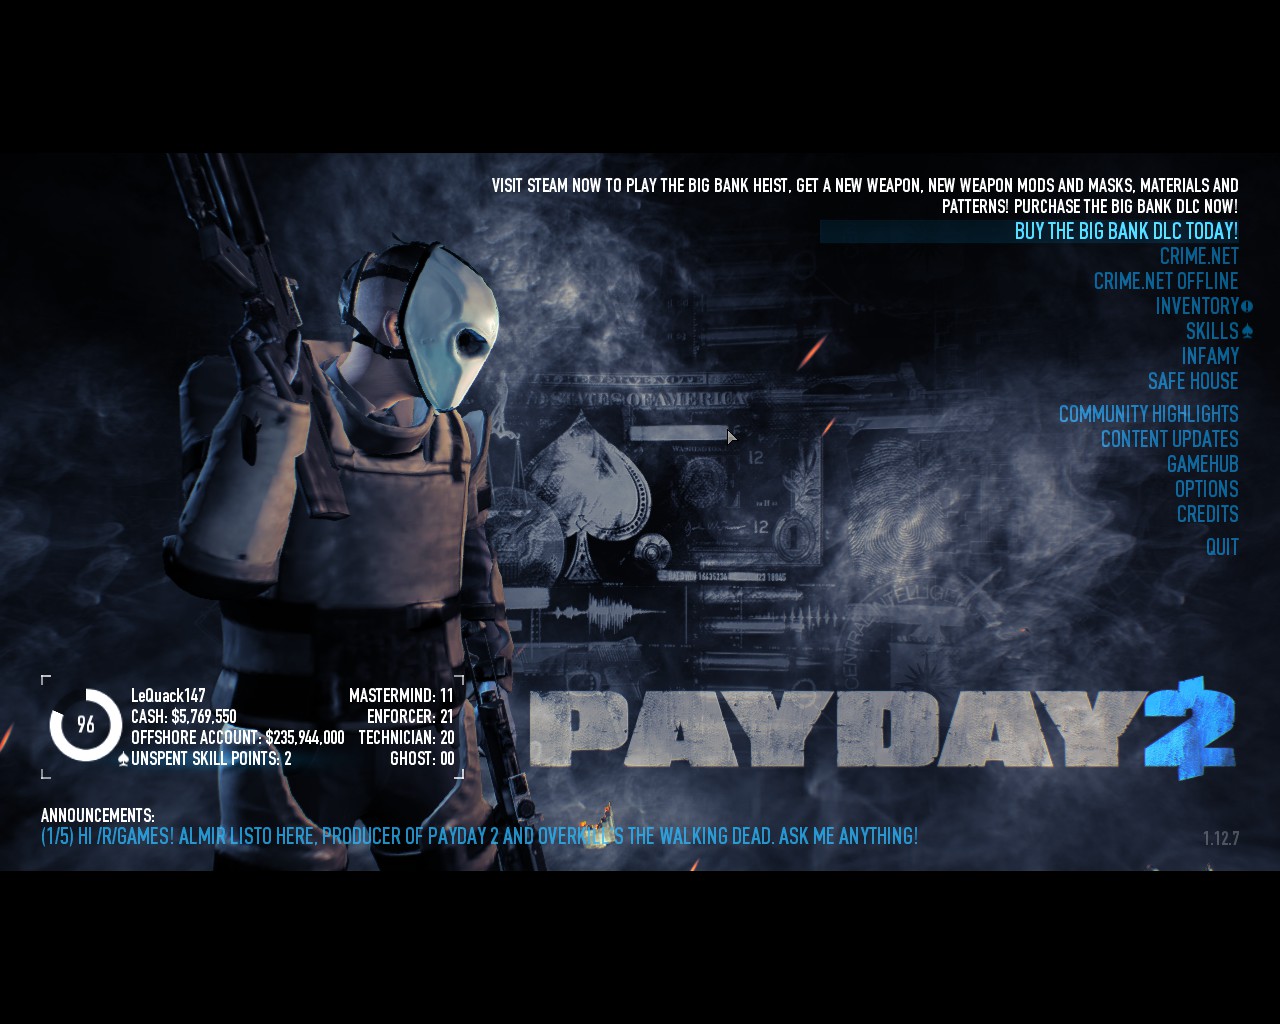 how to get infinite skill points with blt payday 2